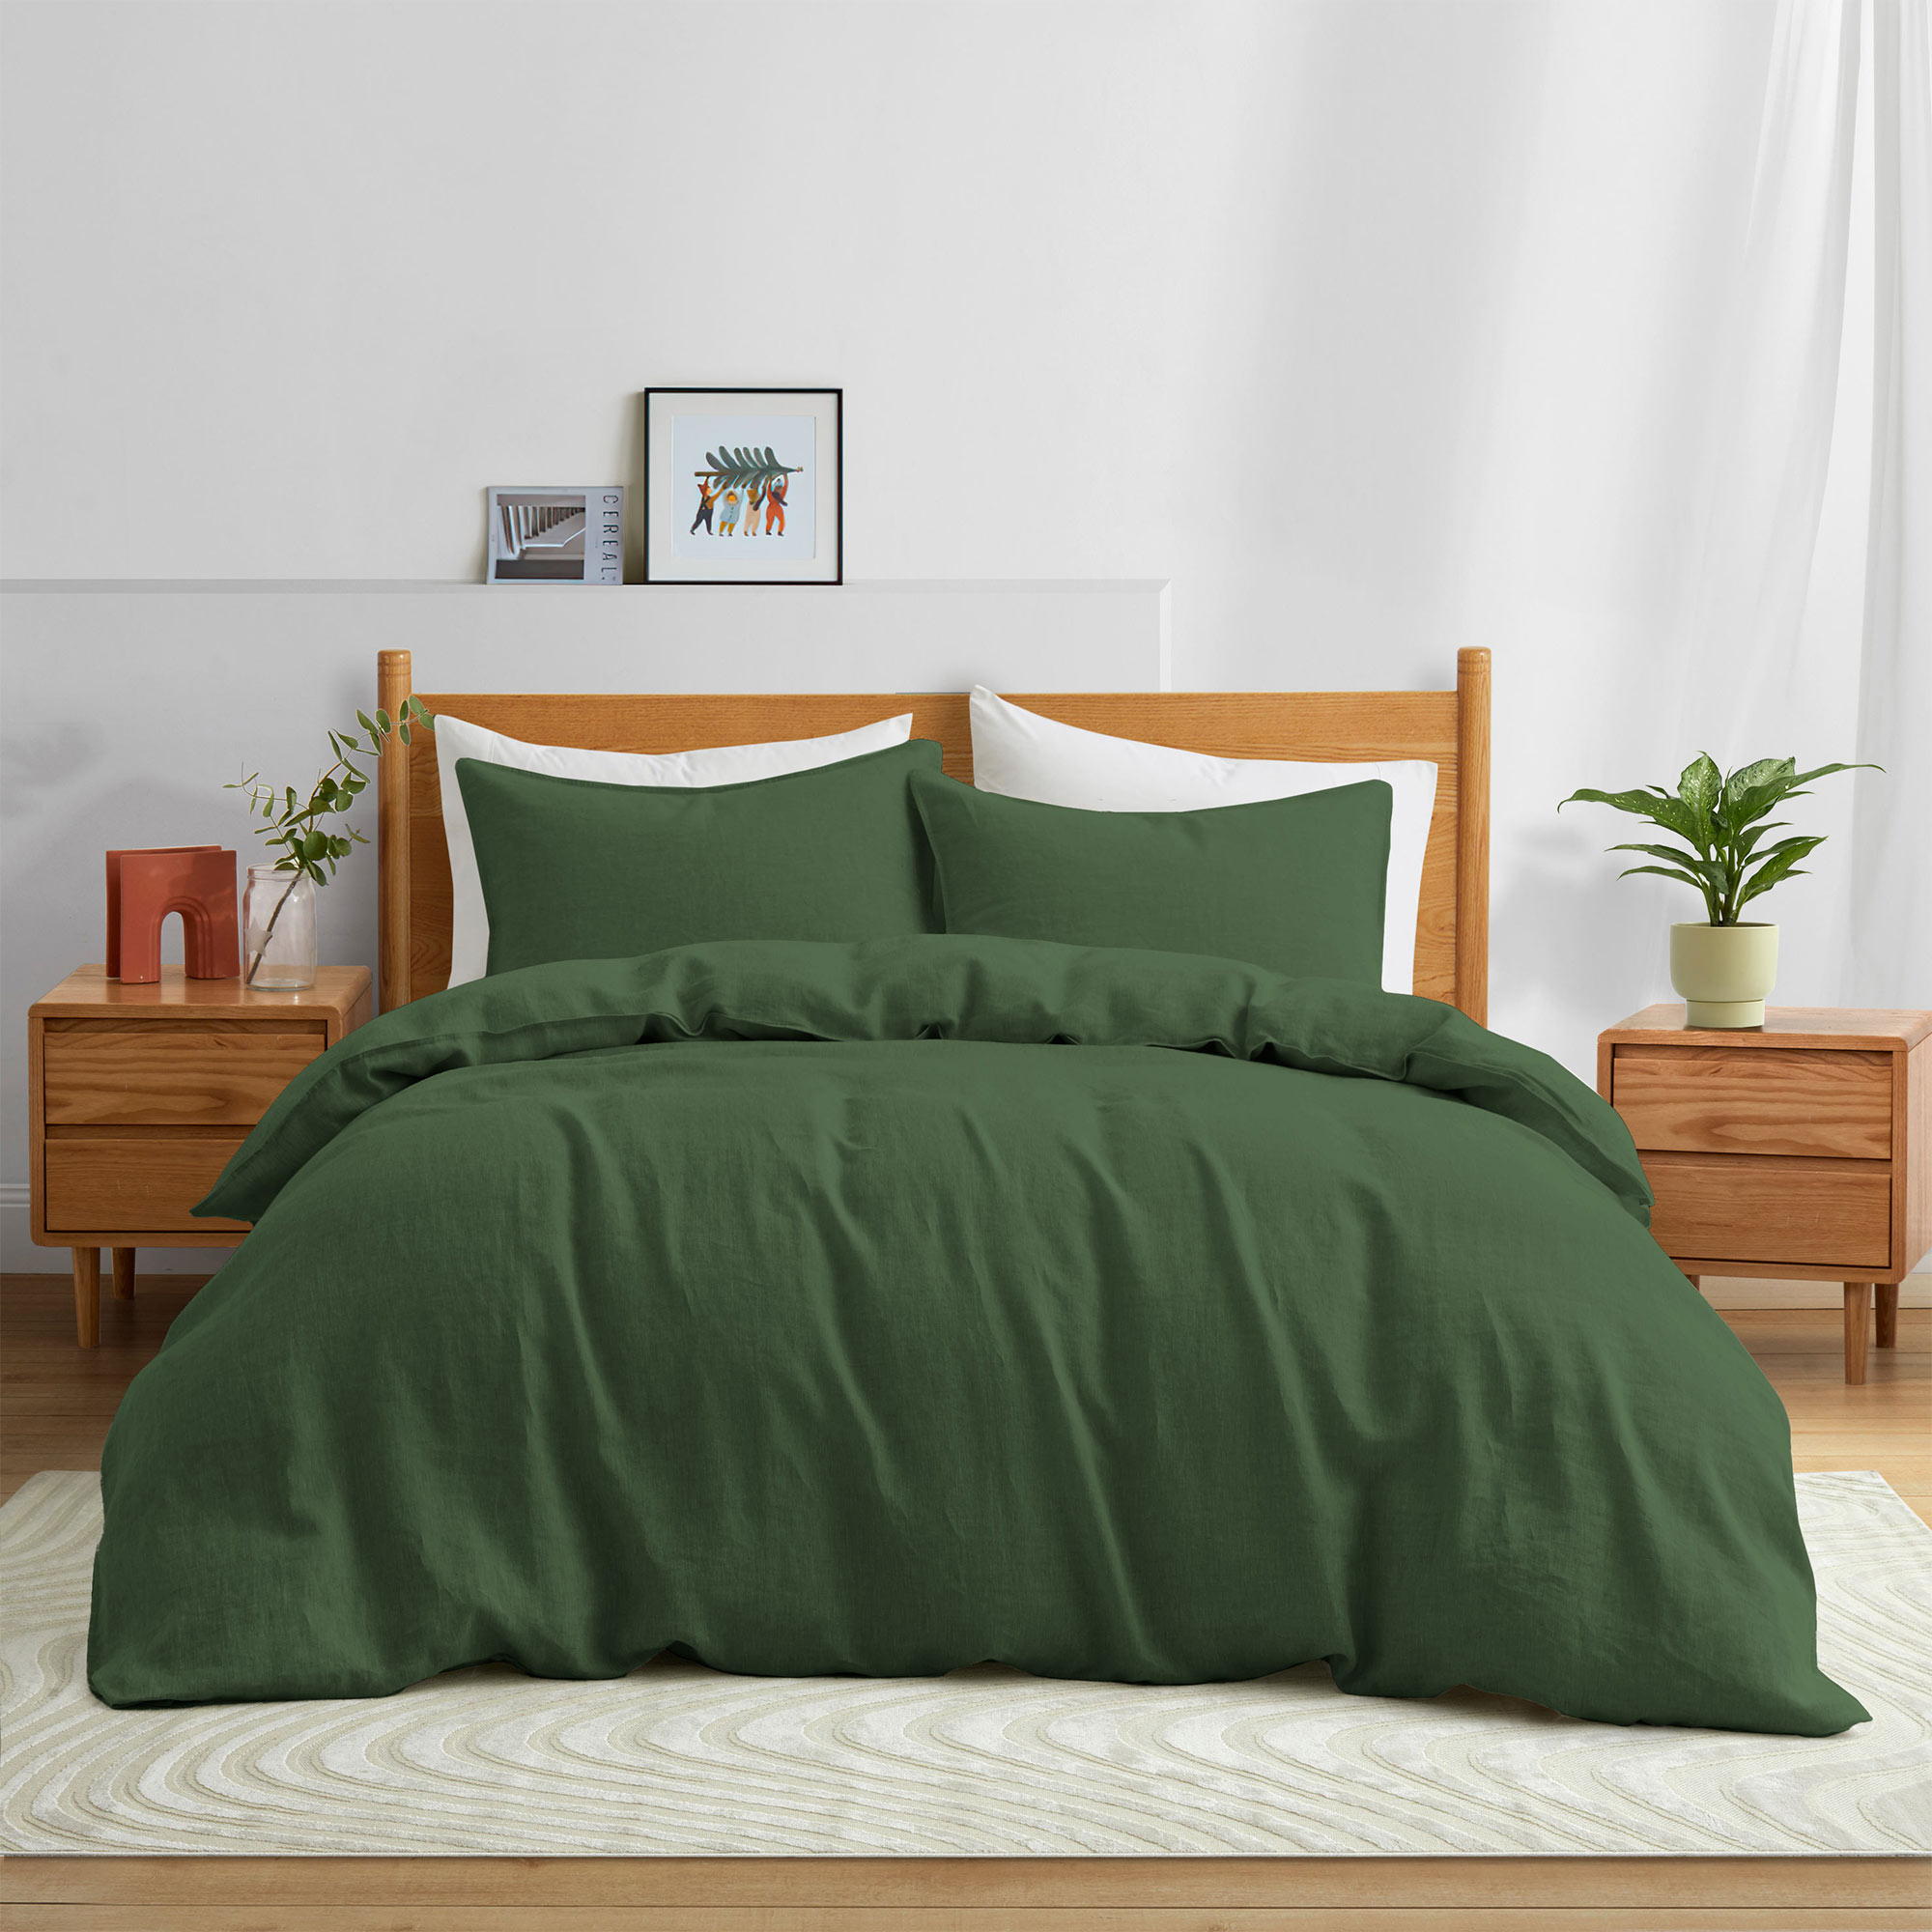 puredown Pure Comfort and Luxury Bedding Bundle: All Season Organic Goose Down Bundle with Pillow-in-Pillow Design Goose Down